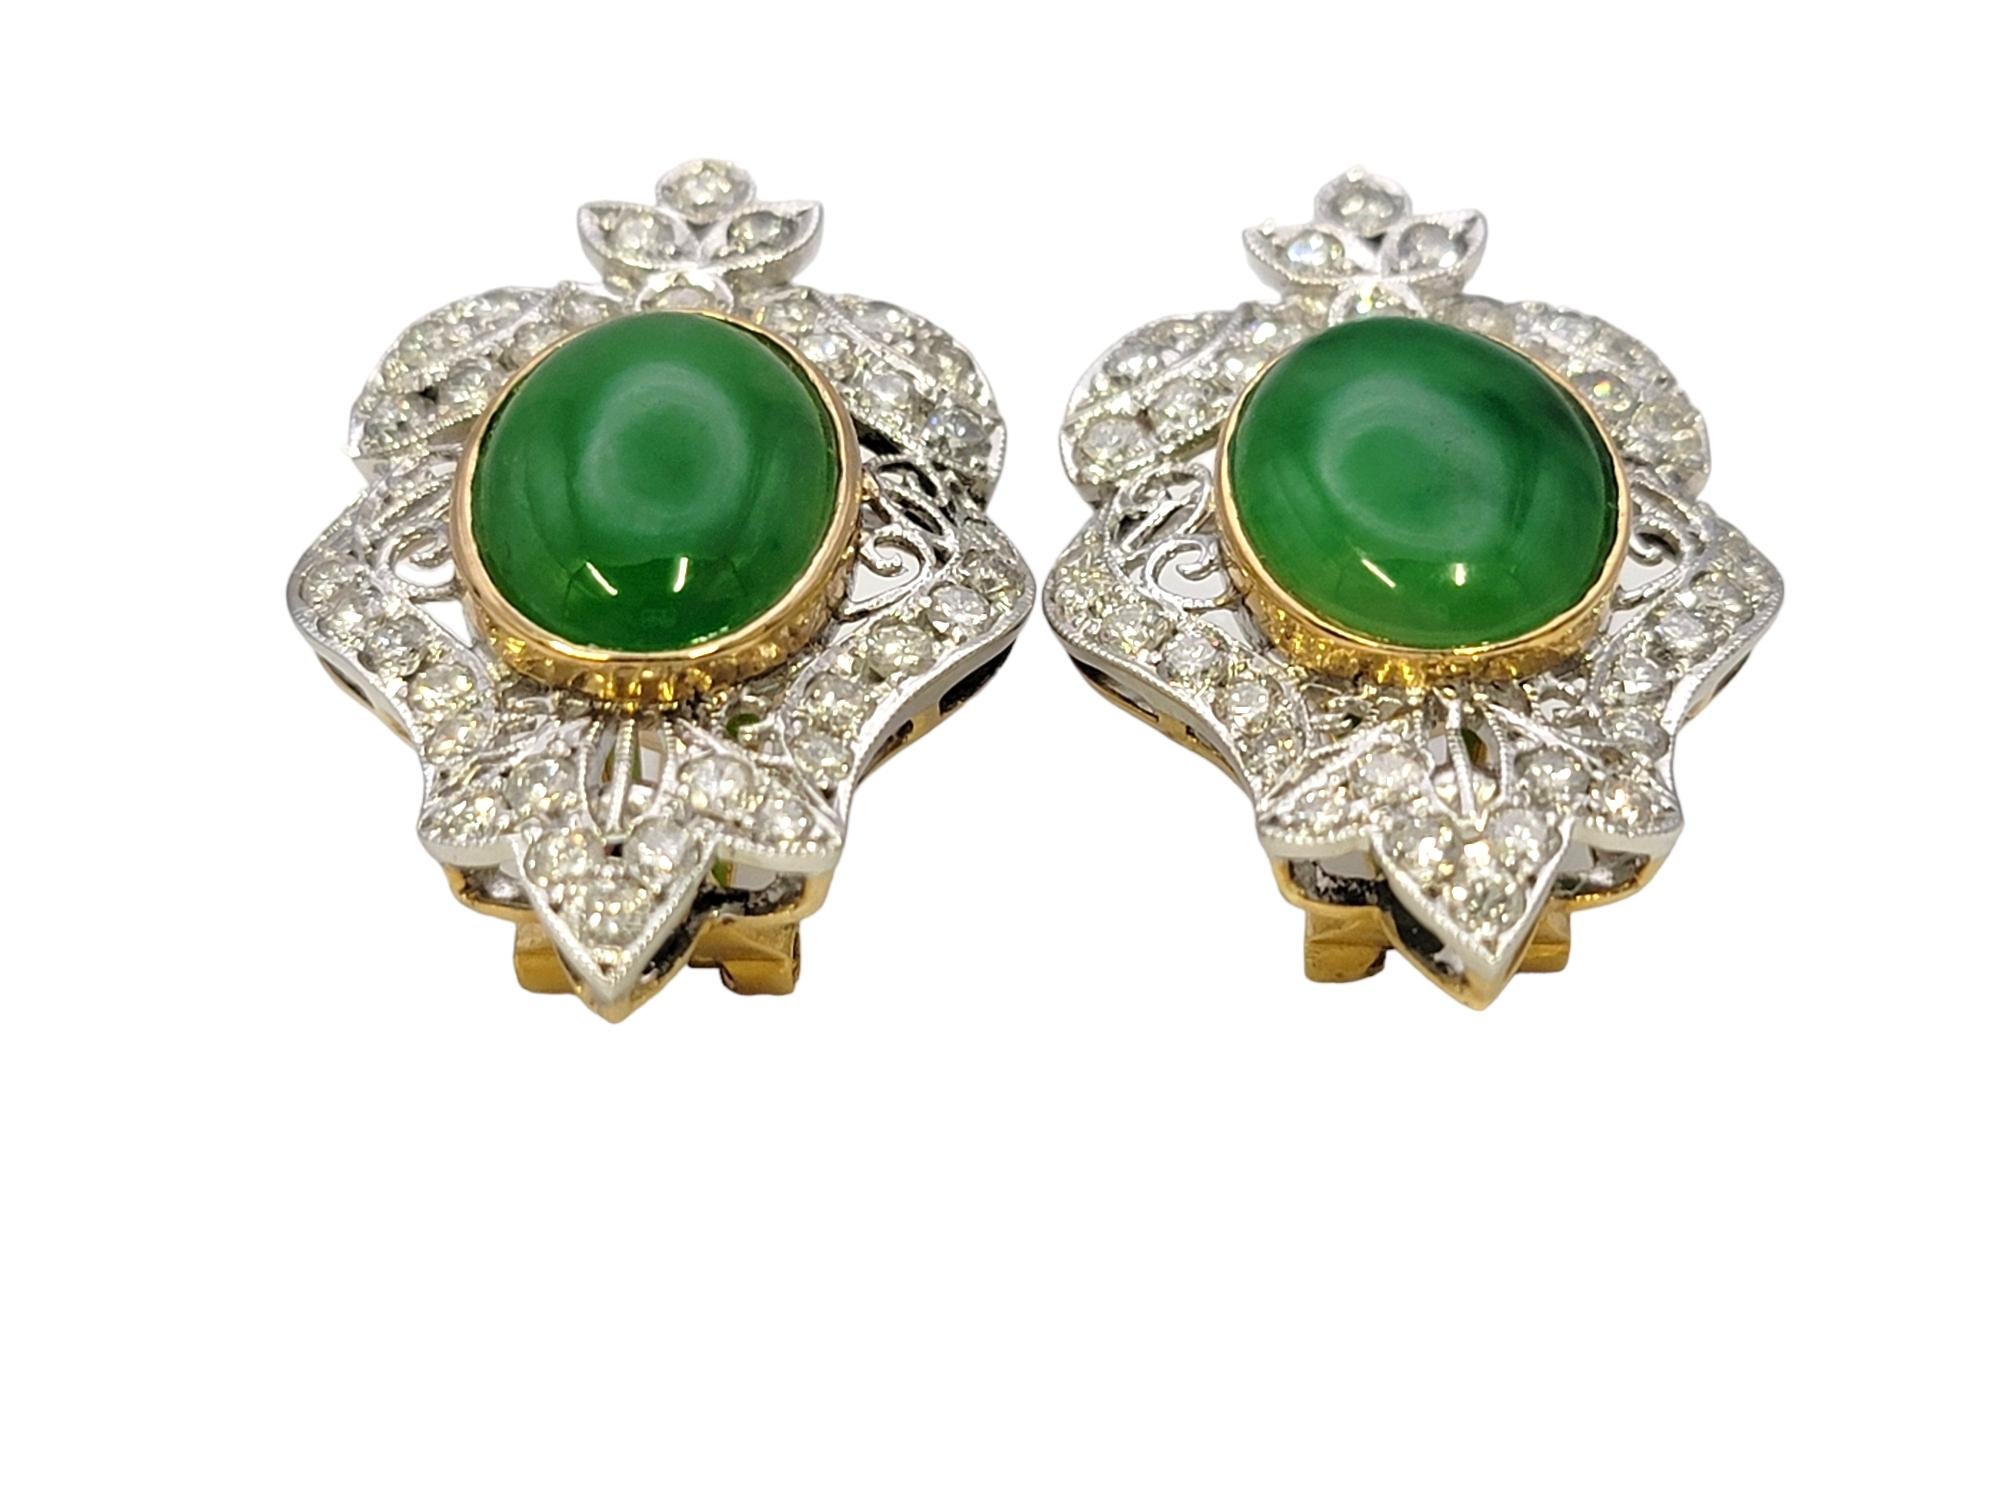 Contemporary Vintage Style Cabochon Jade and Pave Diamond Pierced Earrings in 18 Karat Gold For Sale